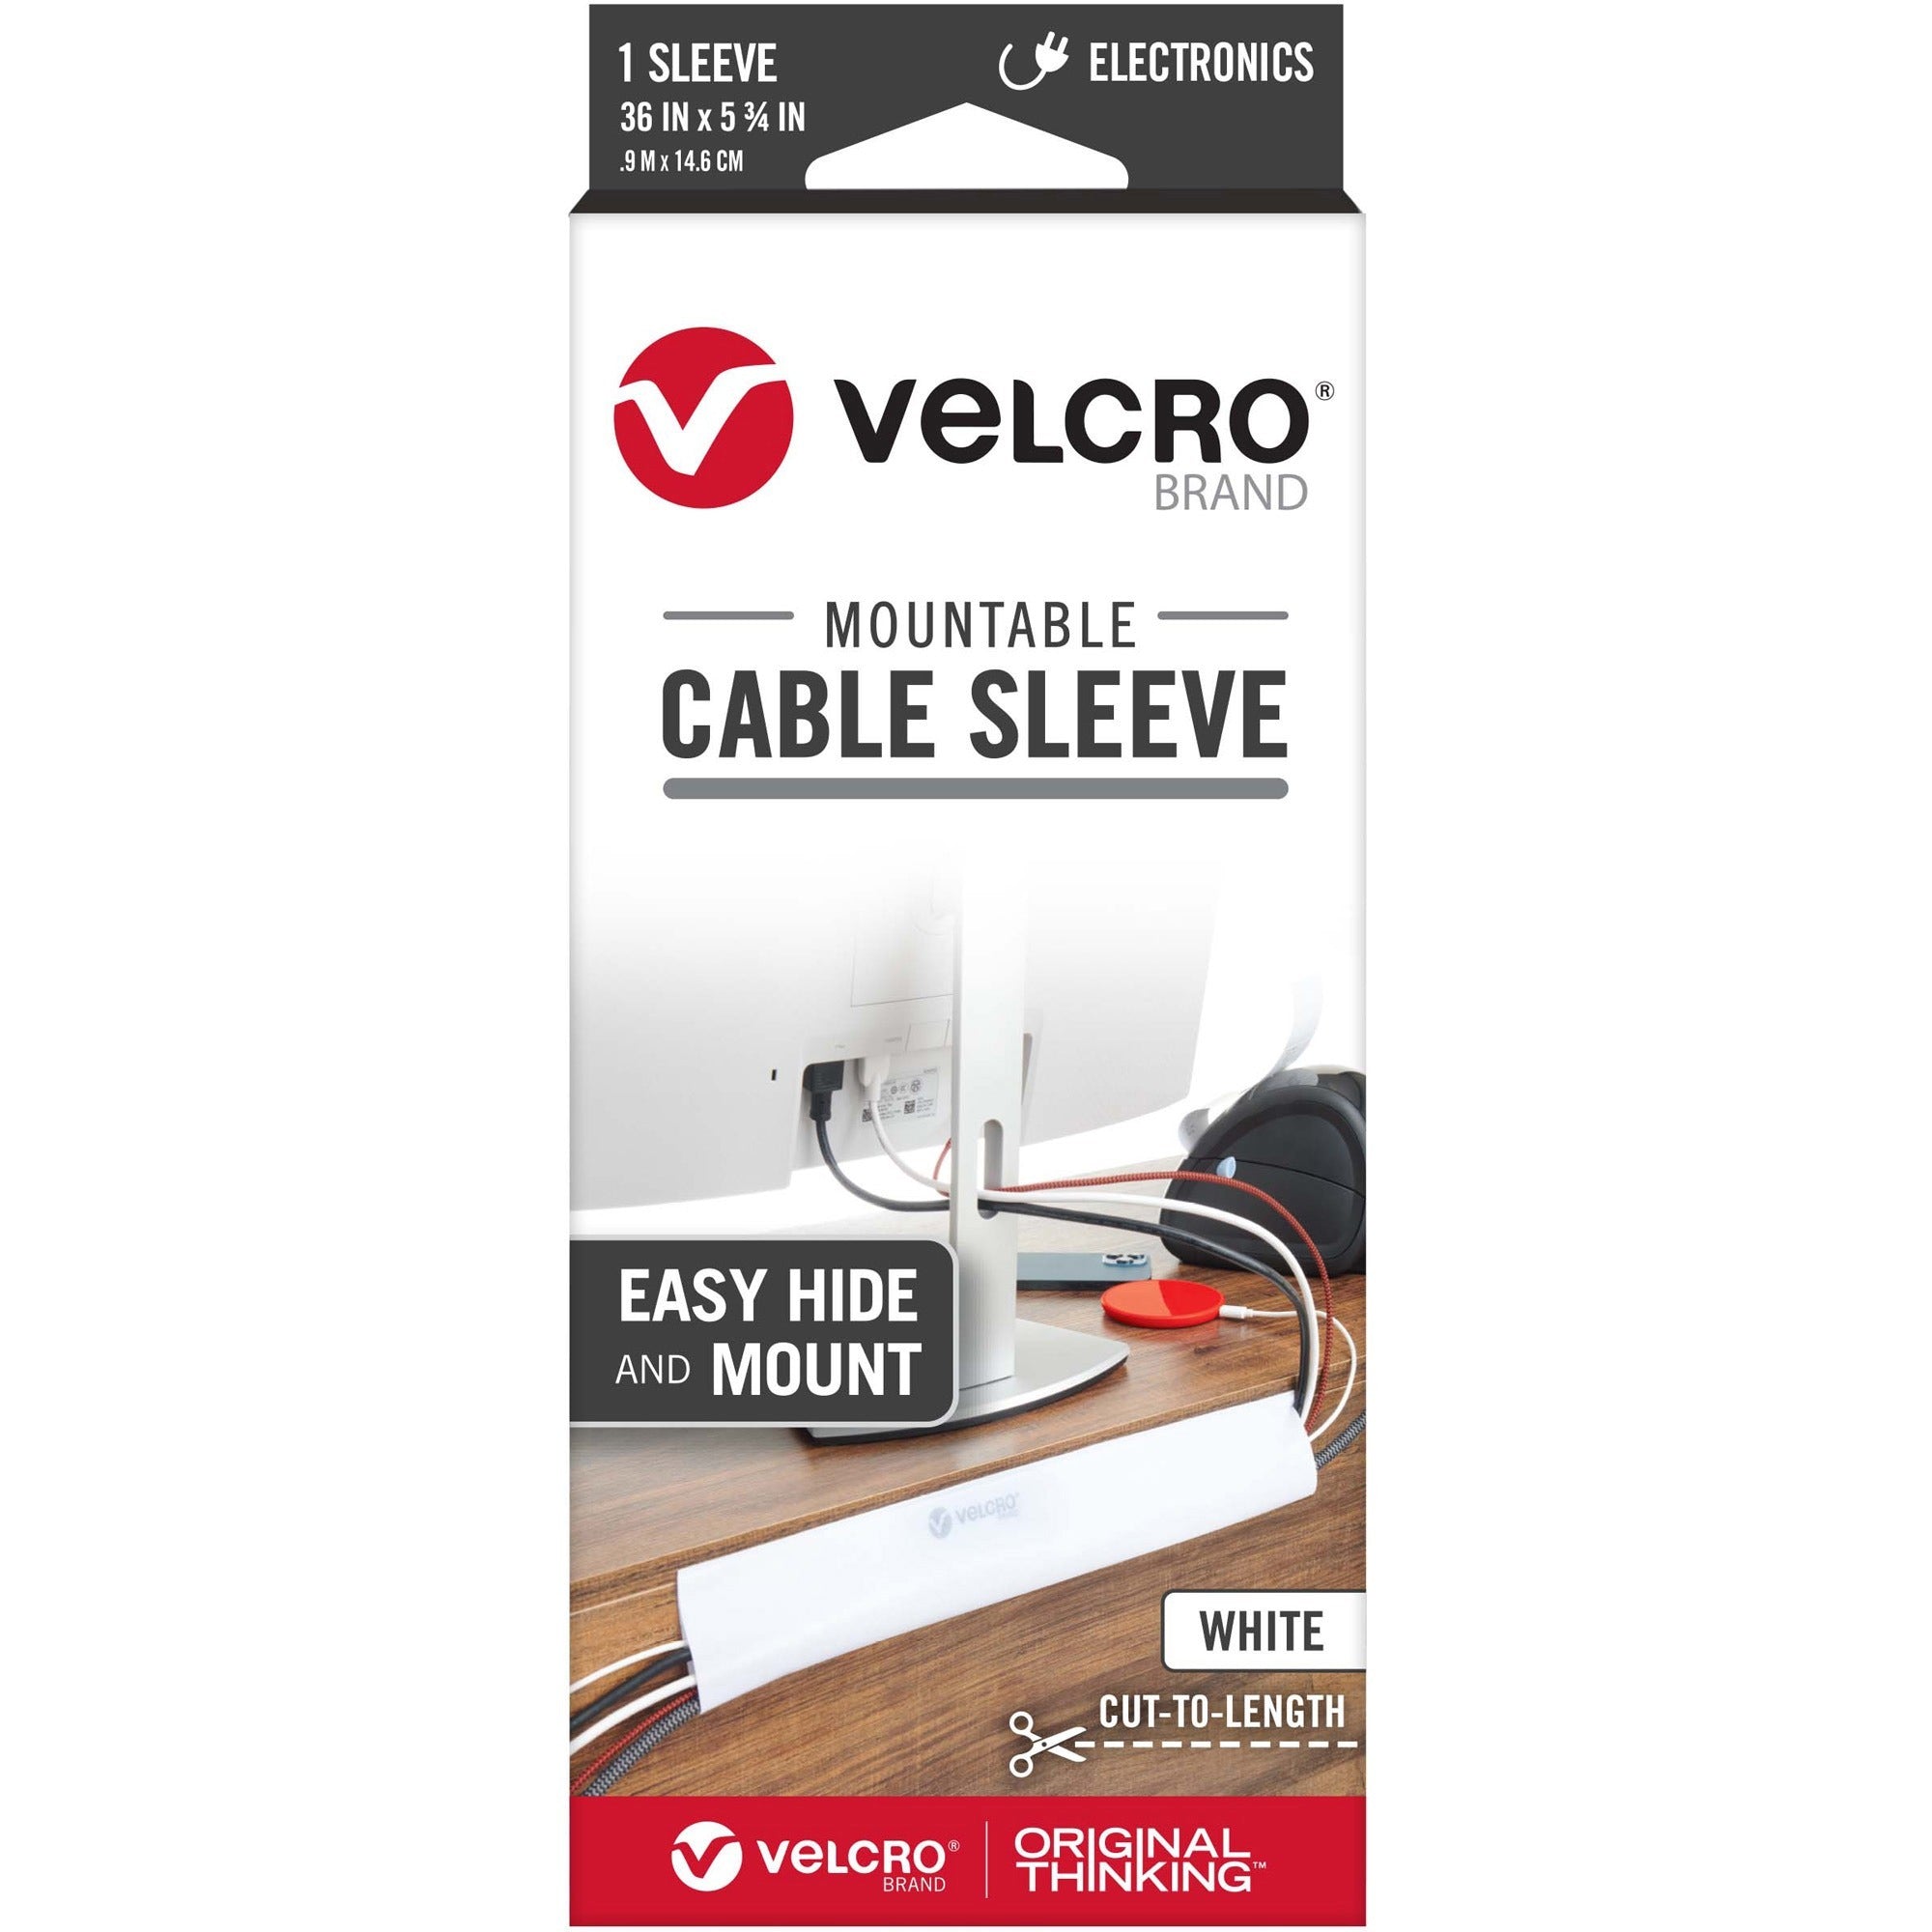 velcro-mountable-cut-to-length-cable-sleeves-cable-sleeve-white-1-36-length_vek30800 - 1